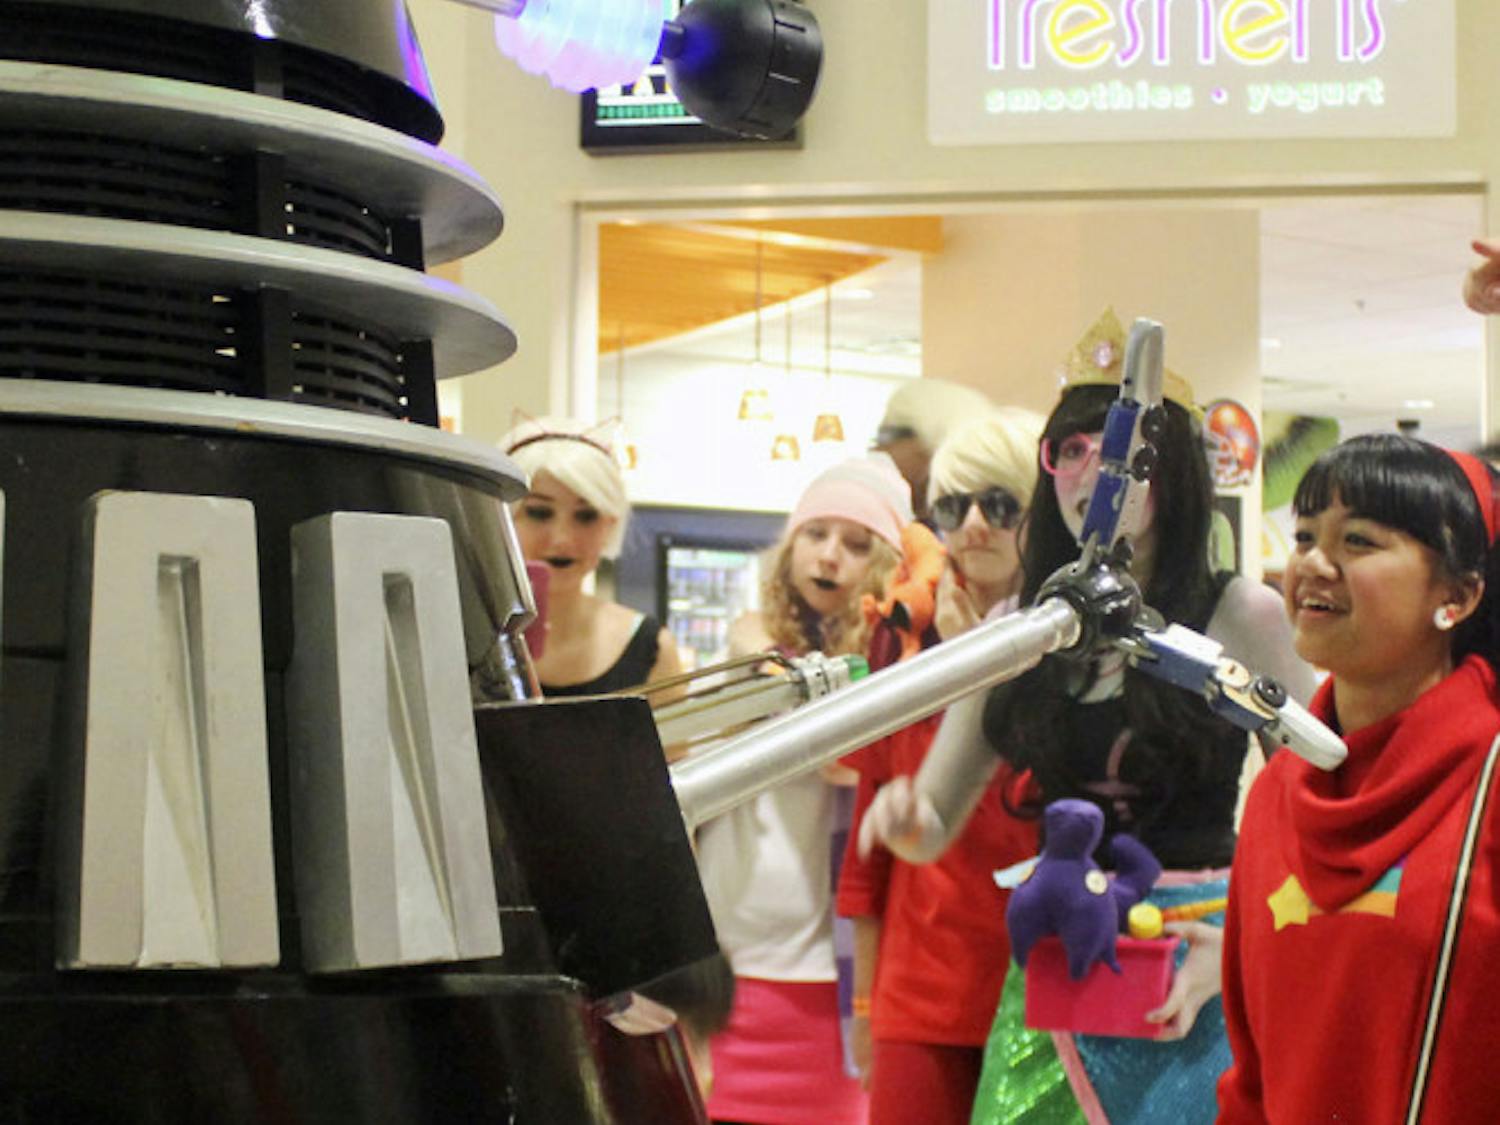 A Dalek, a creature from the British television program Doctor Who, roams through the Reitz Union on Saturday during SwampCon. The convention was attended by people dressed up as characters from different fictional series.